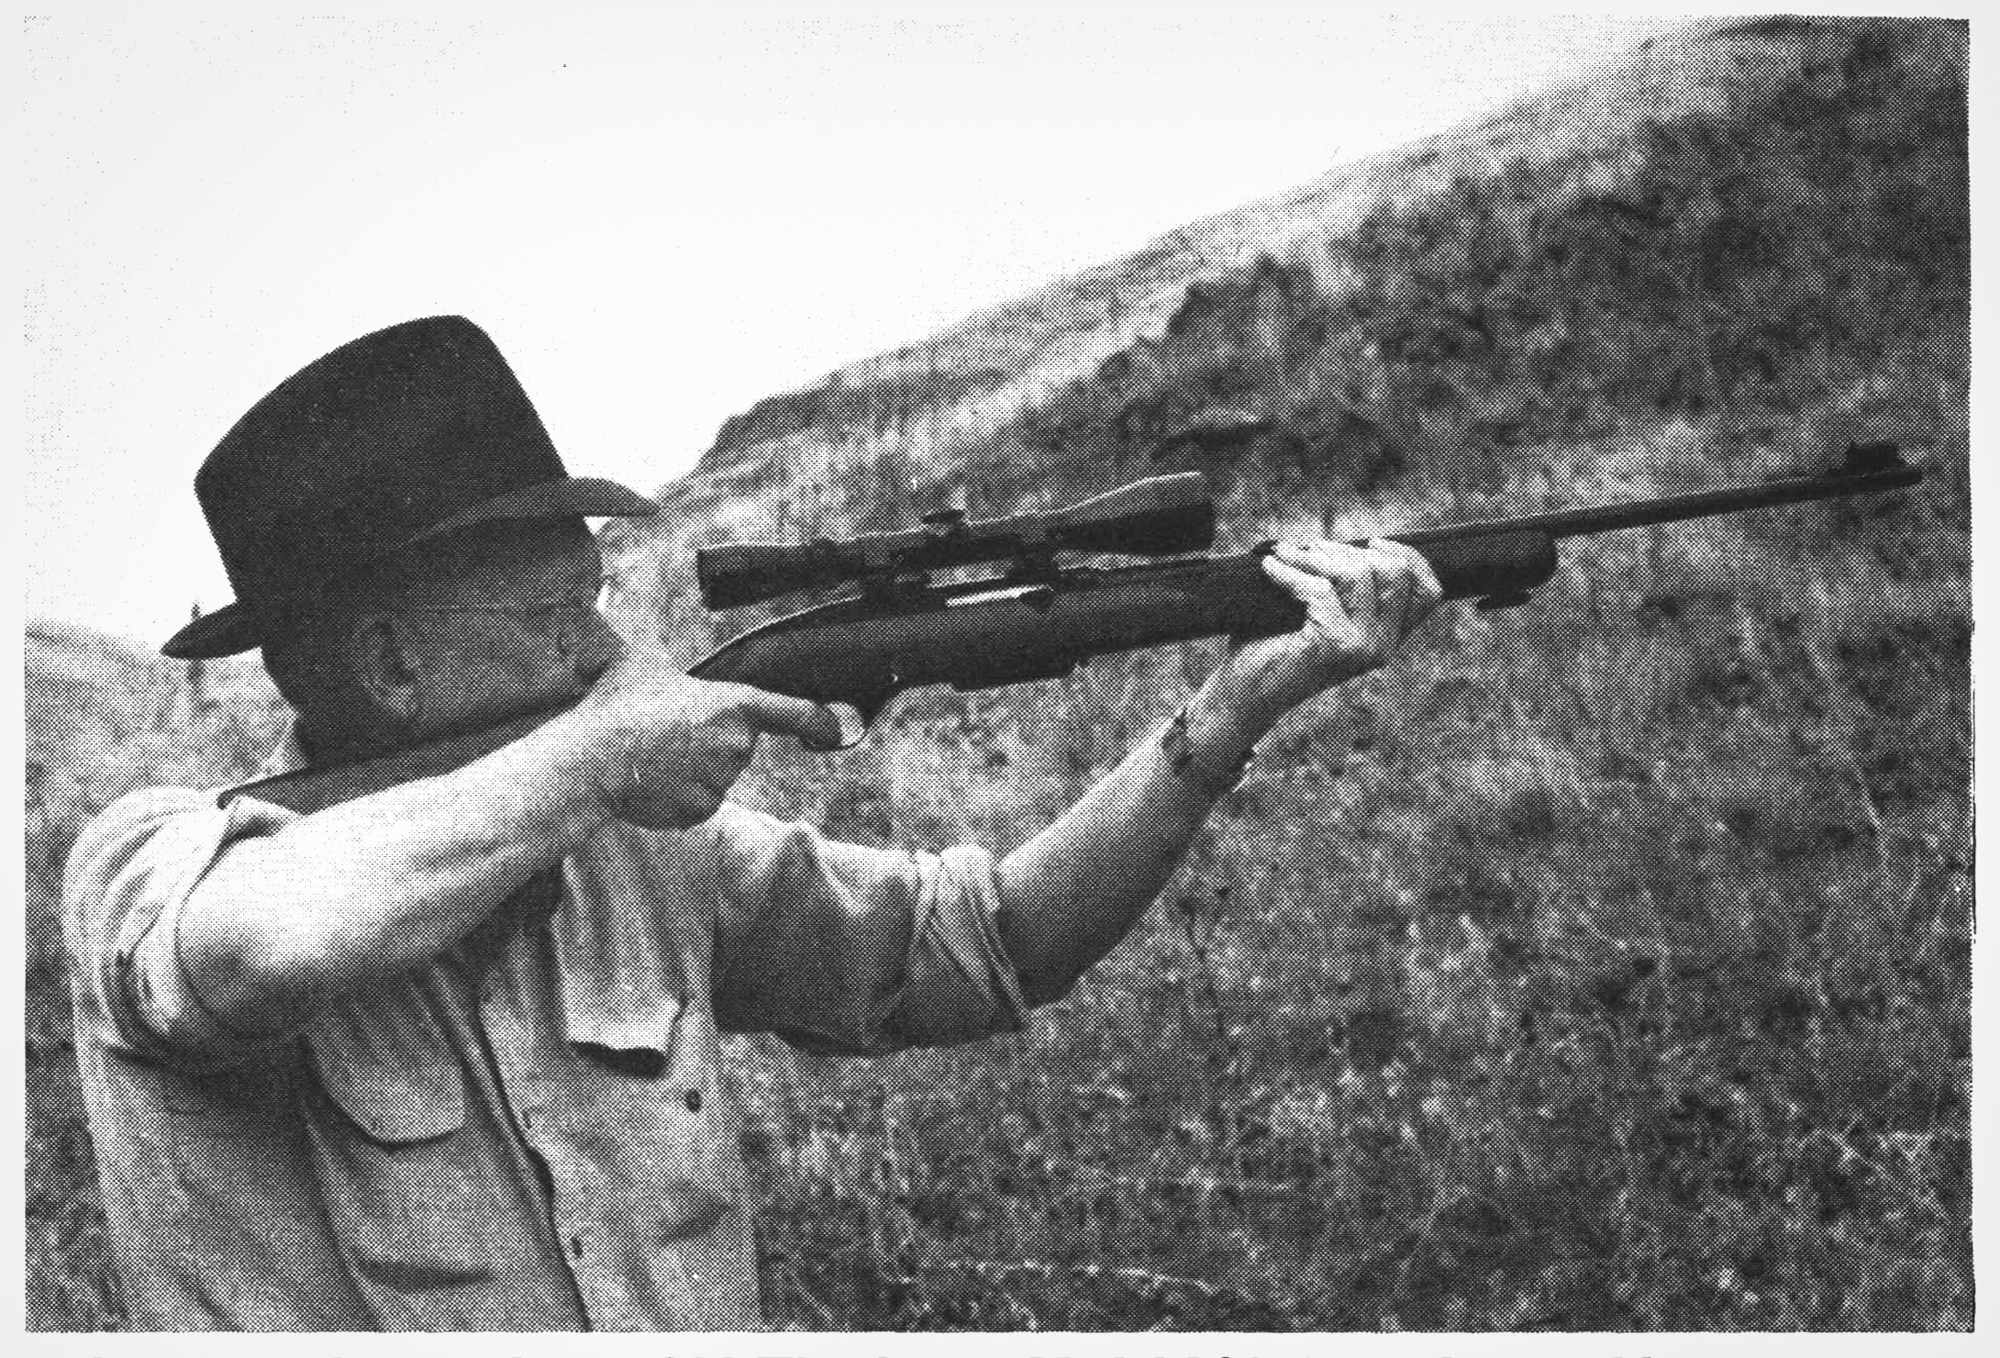 Then-shooting editor Jack O'Connor with what he considered a good deer rig: a .308 Winchester Model 100 topped with a "Leupold variable-power scope."